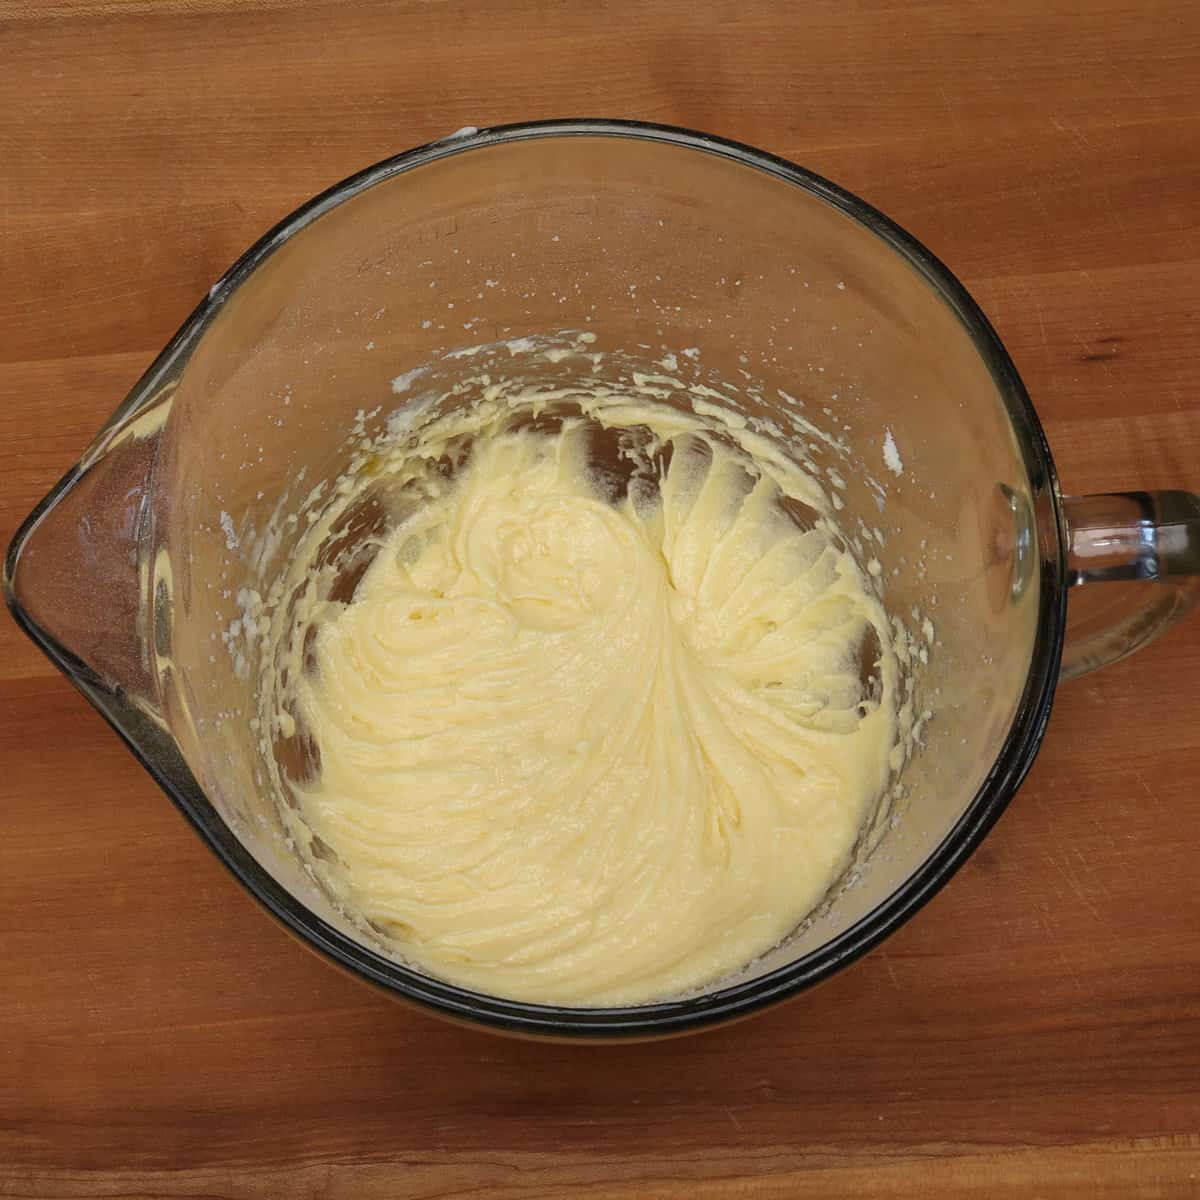 butter, egg, sugar and extracts mixed together in a mixing bowl.